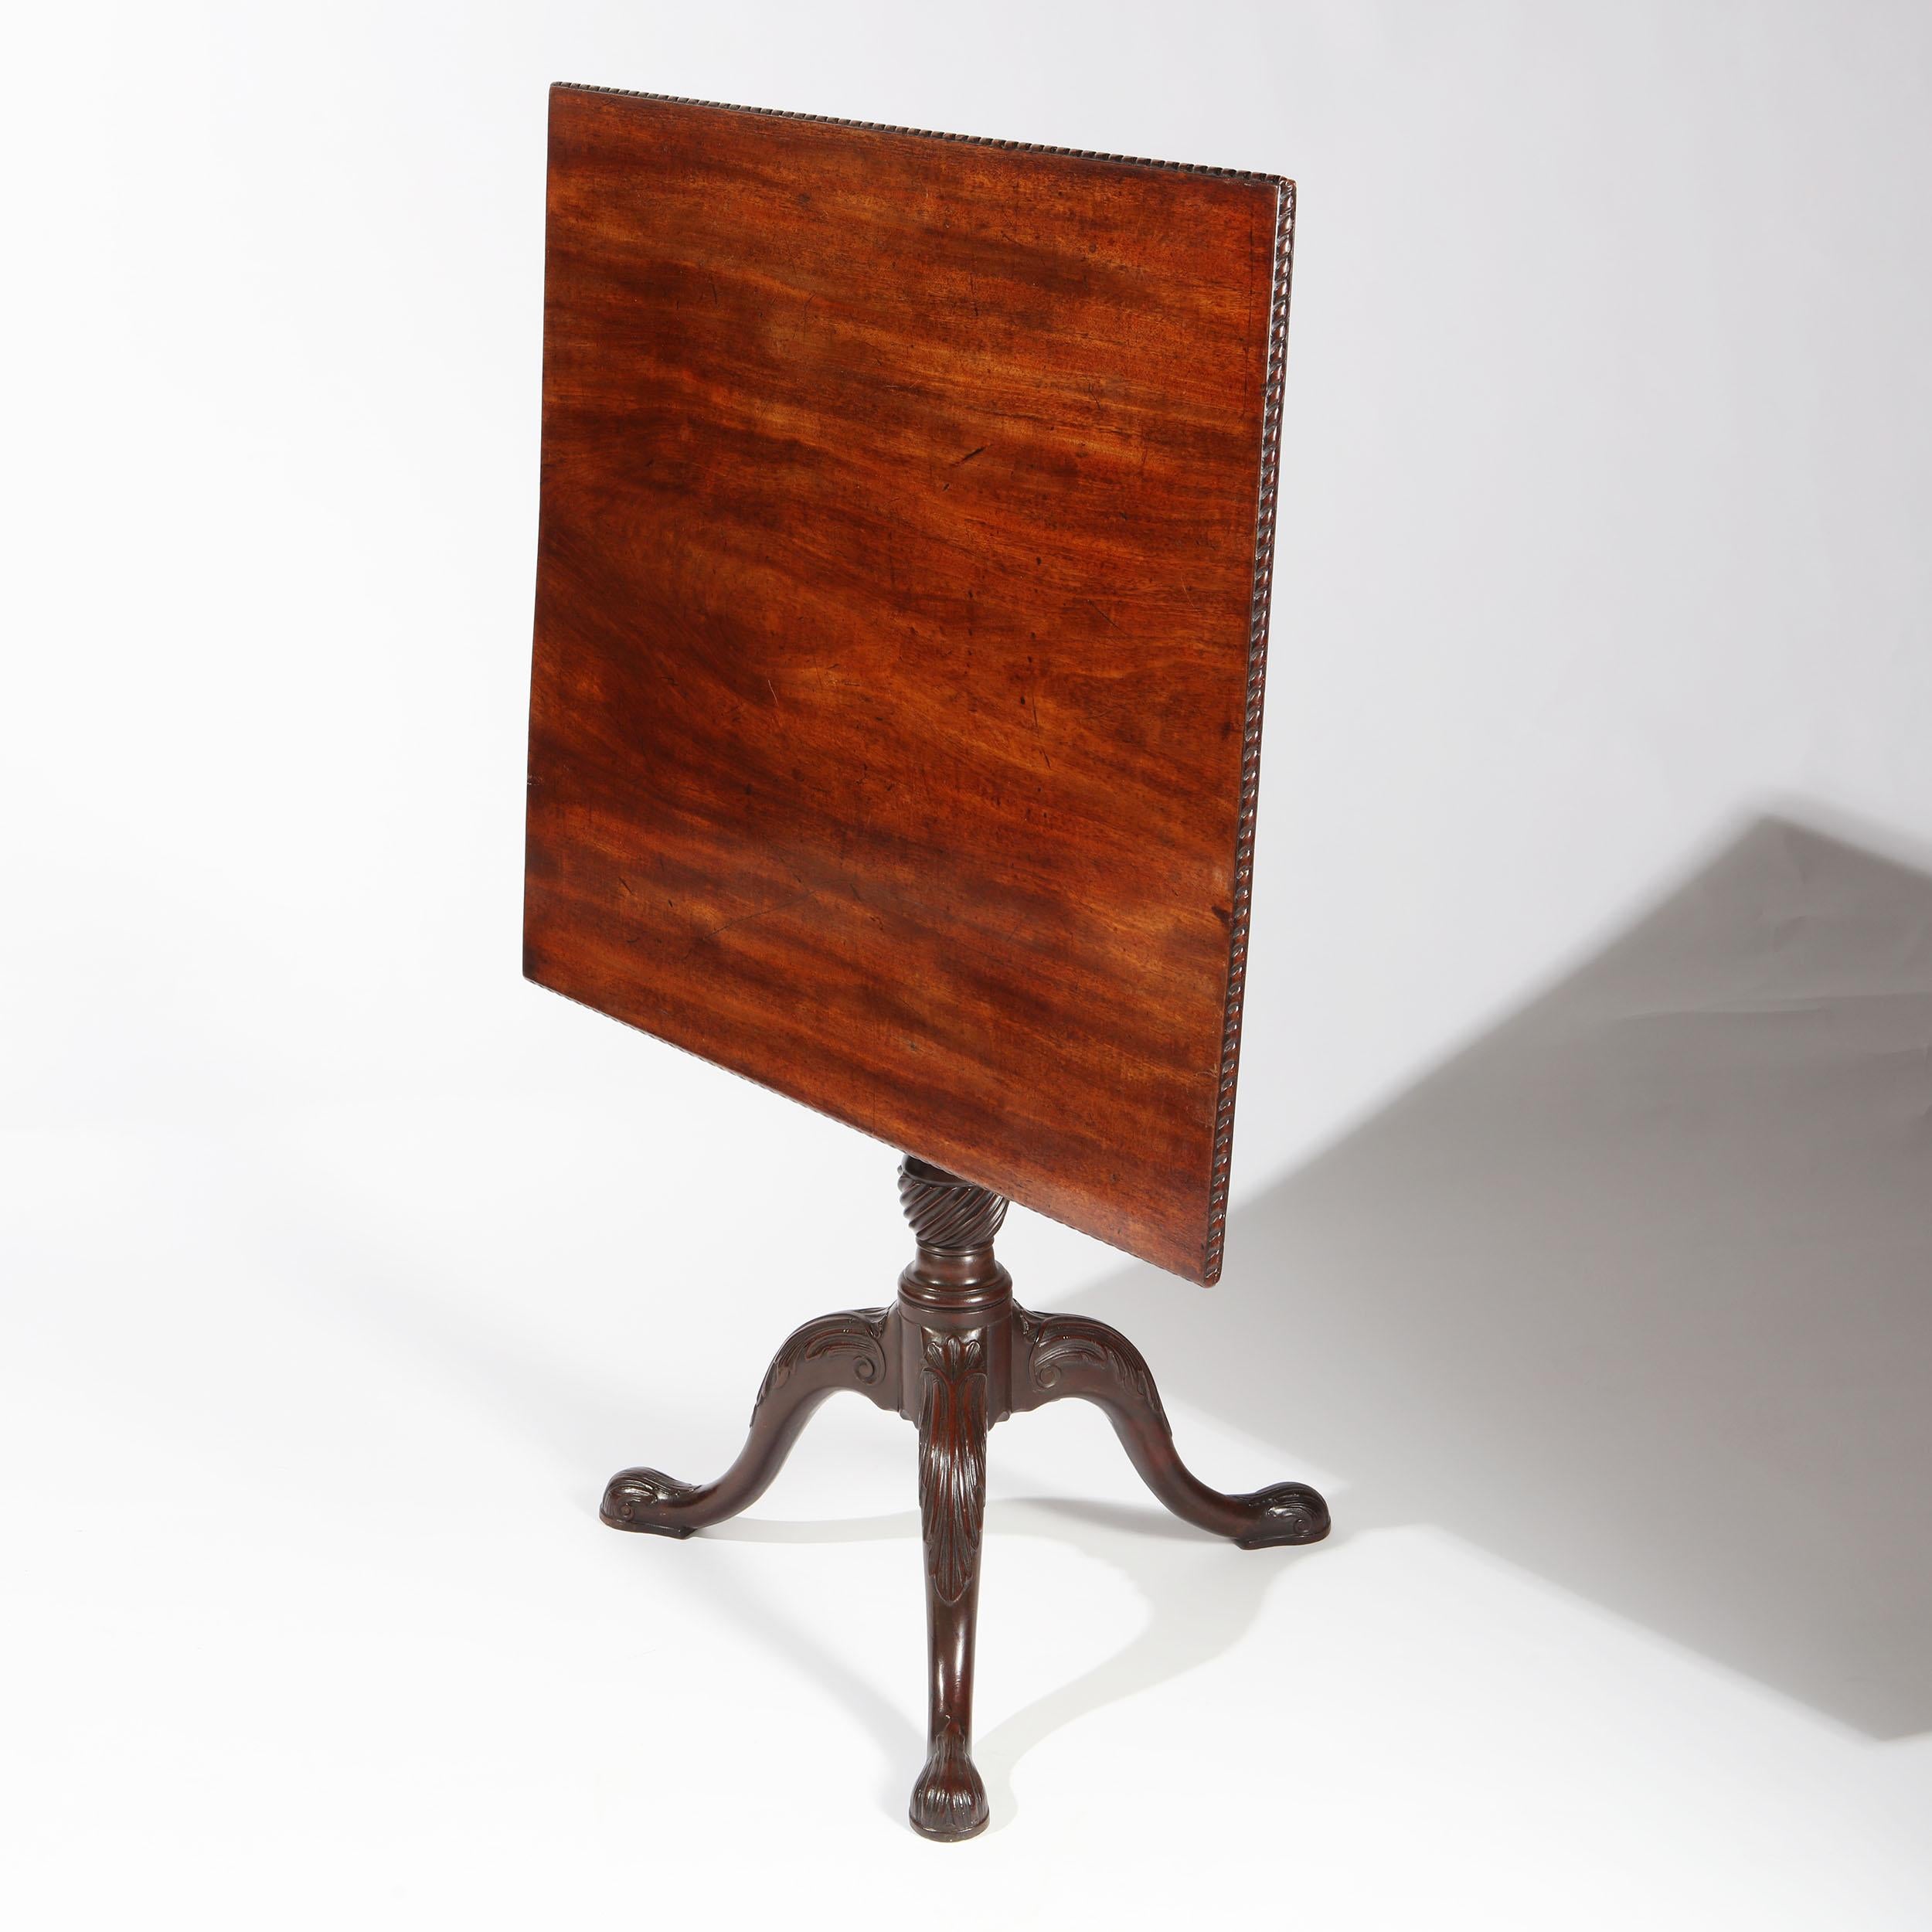 George II Chippendale Mahogany Tripod Table For Sale 3